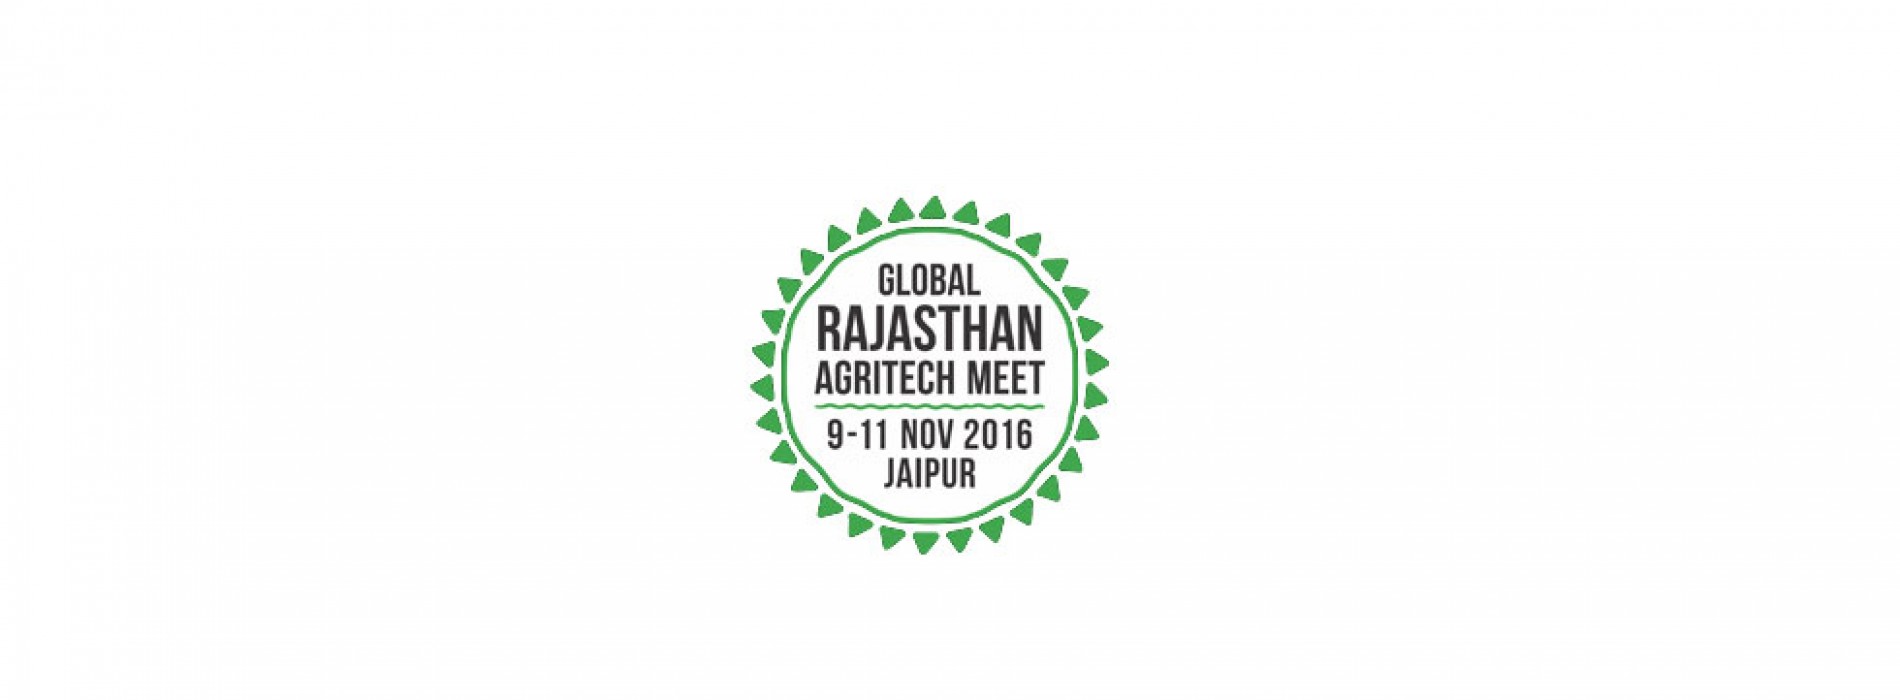 Rajasthan invites Maharashtra industrialists/farmers to partner with Rajasthan in agri sector